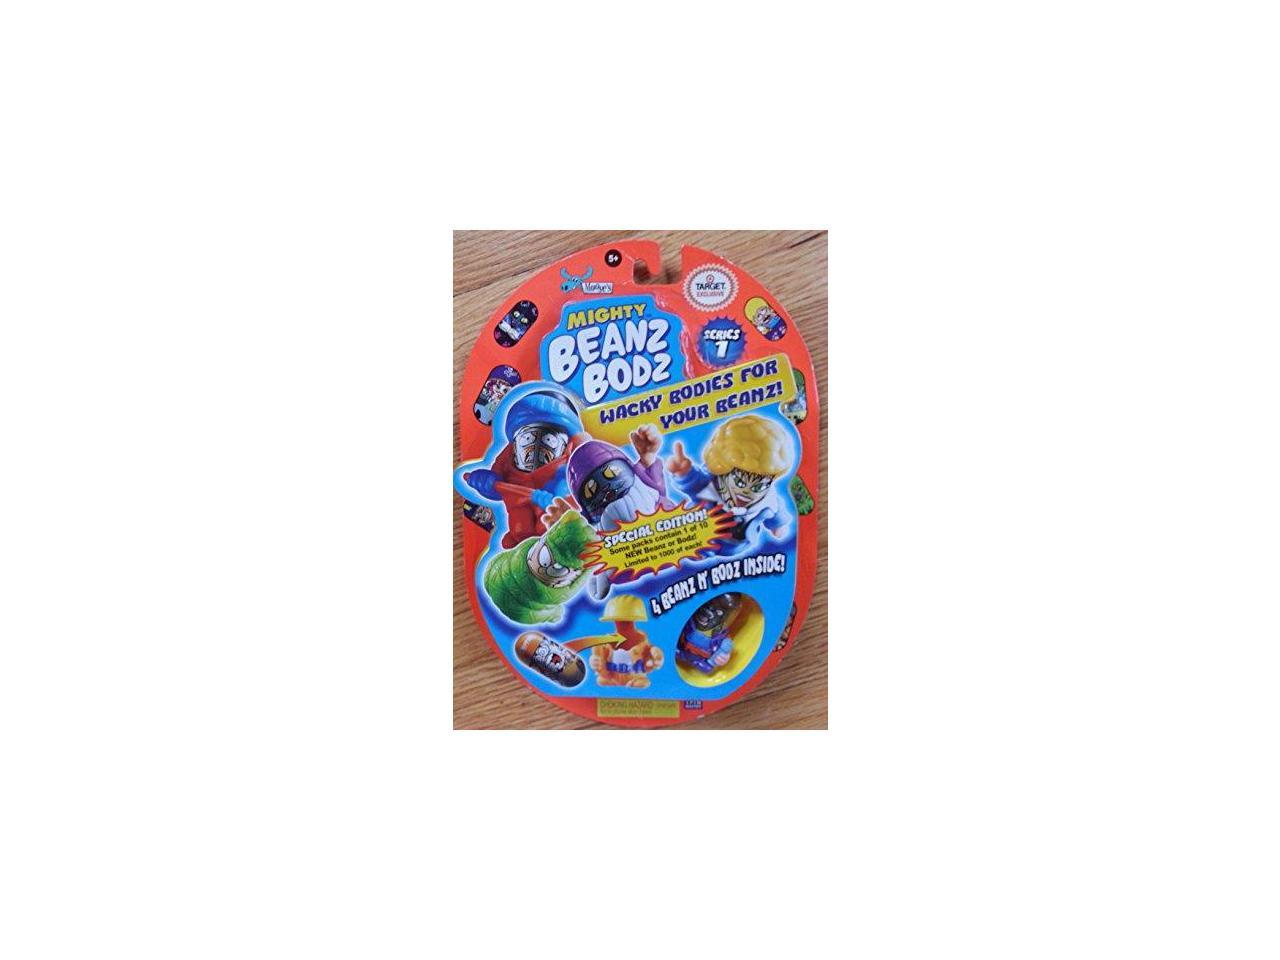 4 Beanz 4 Bodz Special Limited Edition Mooses Mighty Beanz Bodz Target Exclusive Series 1 Bods Playsets Toys Games Kiririgardenhotel Com